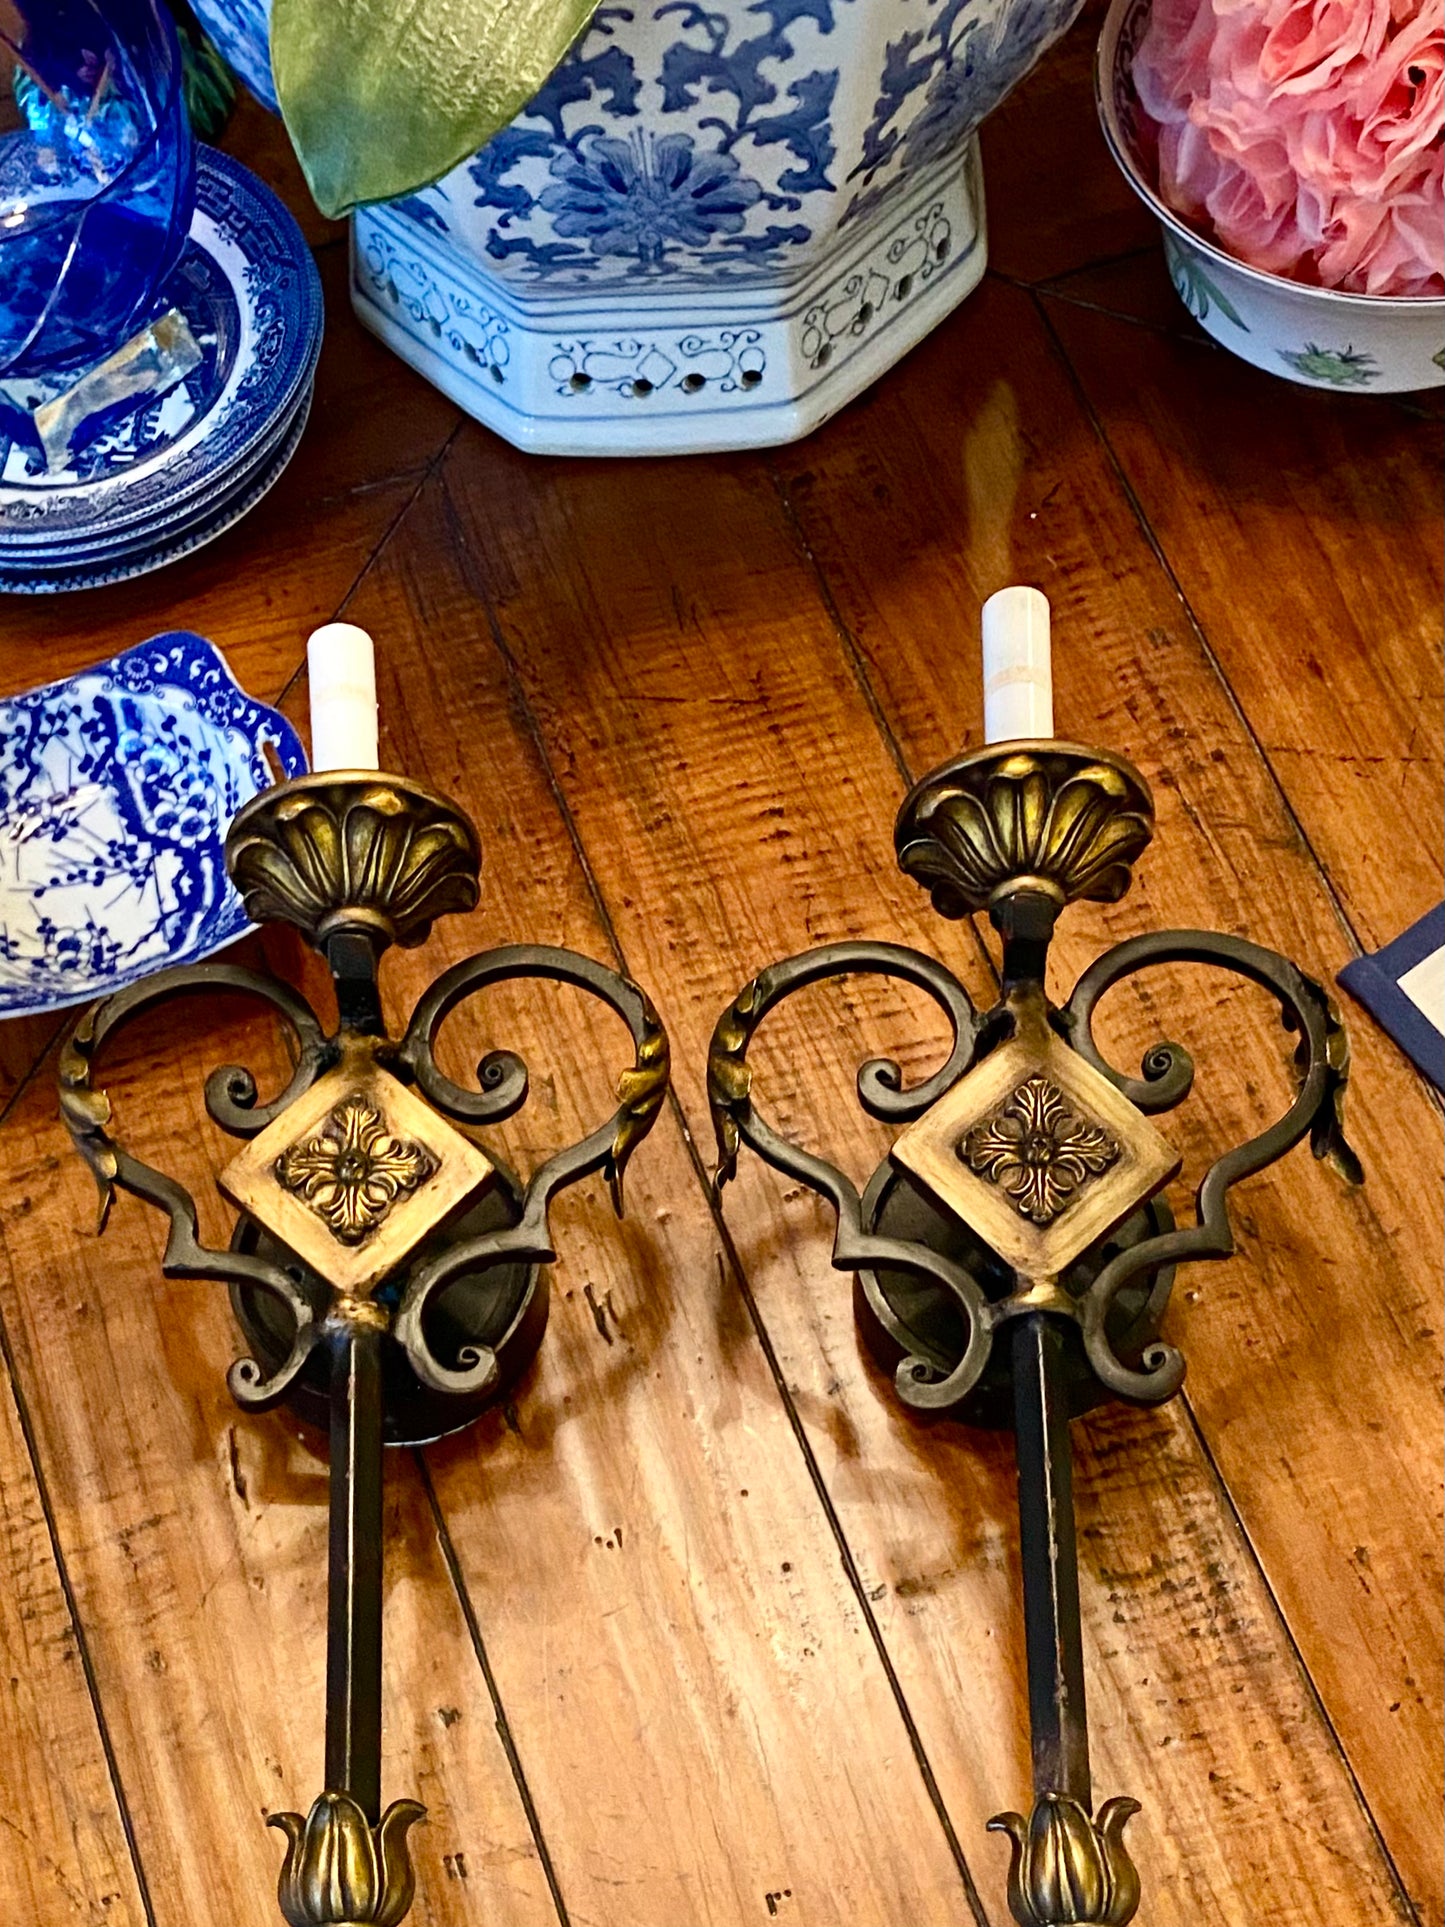 Pair of vintage ebony and gold gilt hardwired wall sconce lighting.